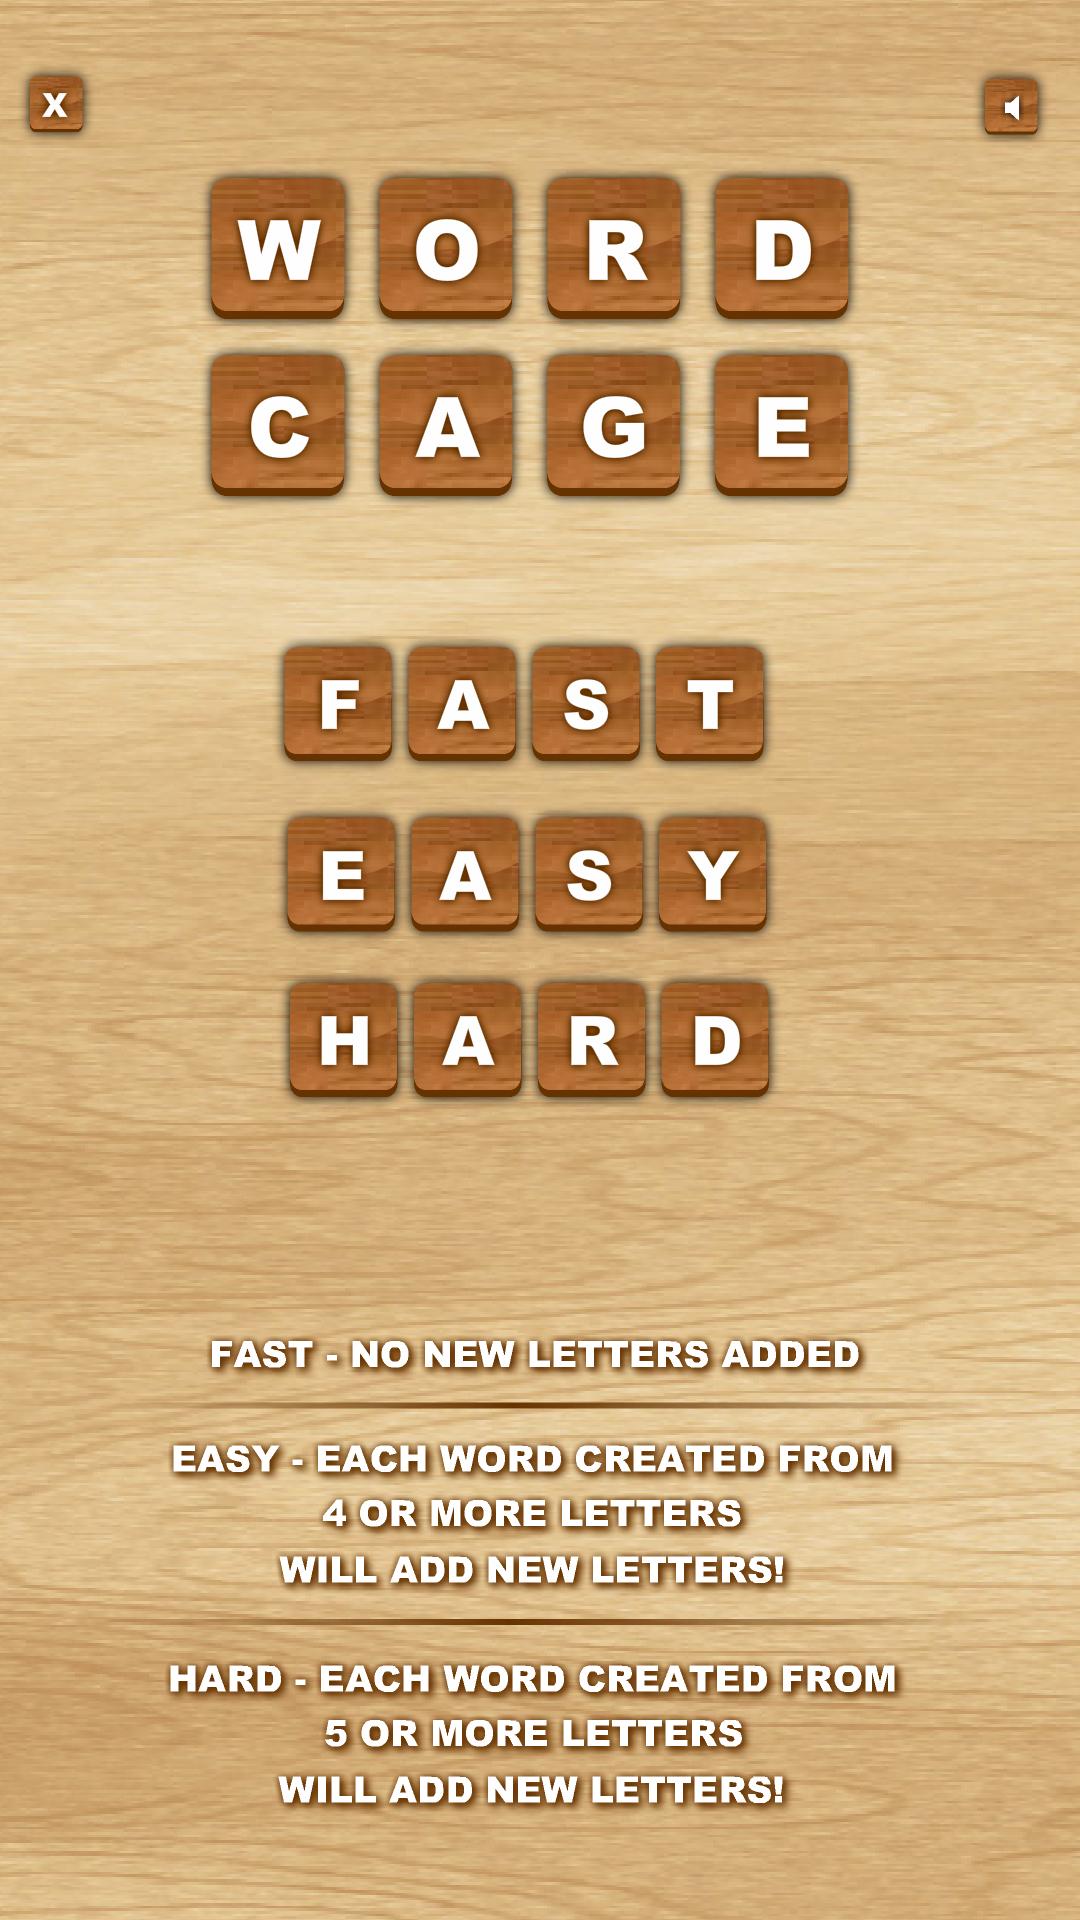 Word Cage PRO for Android - APK Download